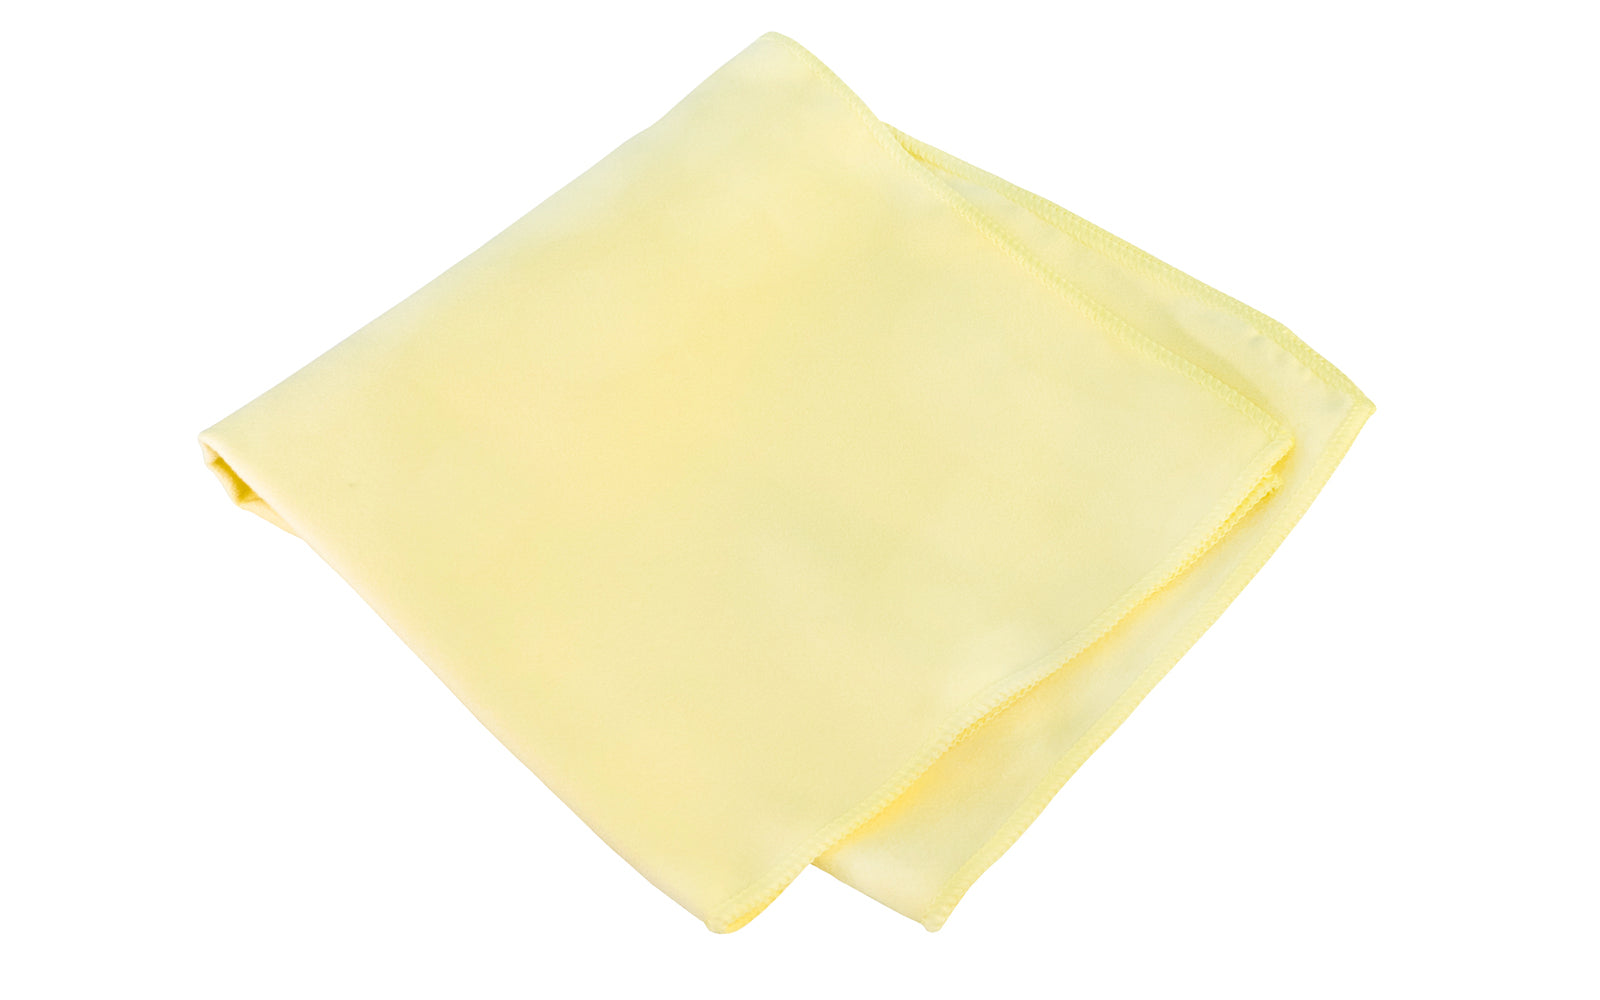 Norton 16" x 16" Micro Fiber Polishing Cloth - Yellow. Attracts & traps smallest particles - Hypo allergenic. Washable & reusable. 70% polyester / 30% polyamide.   Made by Norton Abrasives, St. Gobain. Model No. 05301.